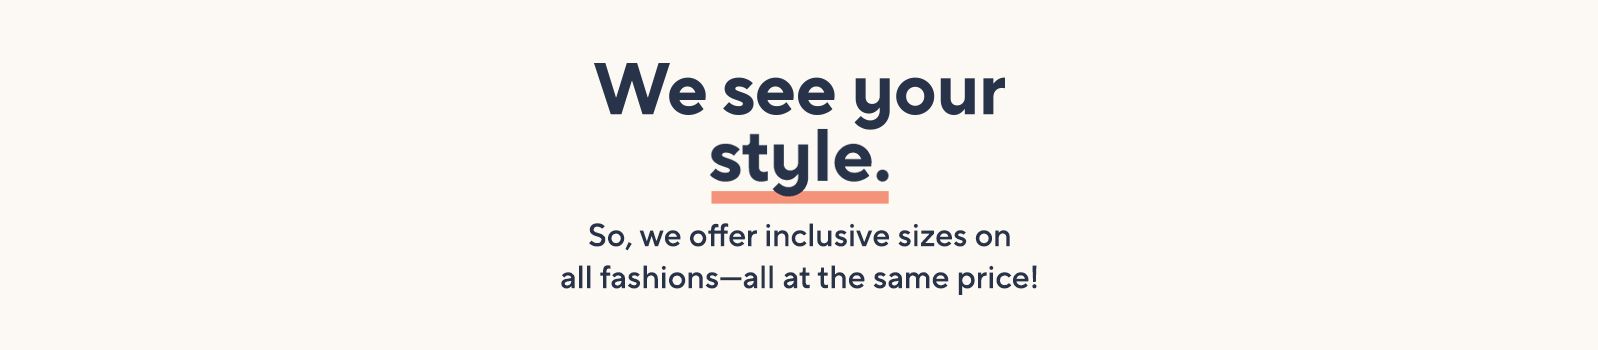 We See Your Style. So, we offer inclusive sizes on all fashions—all at the same price!